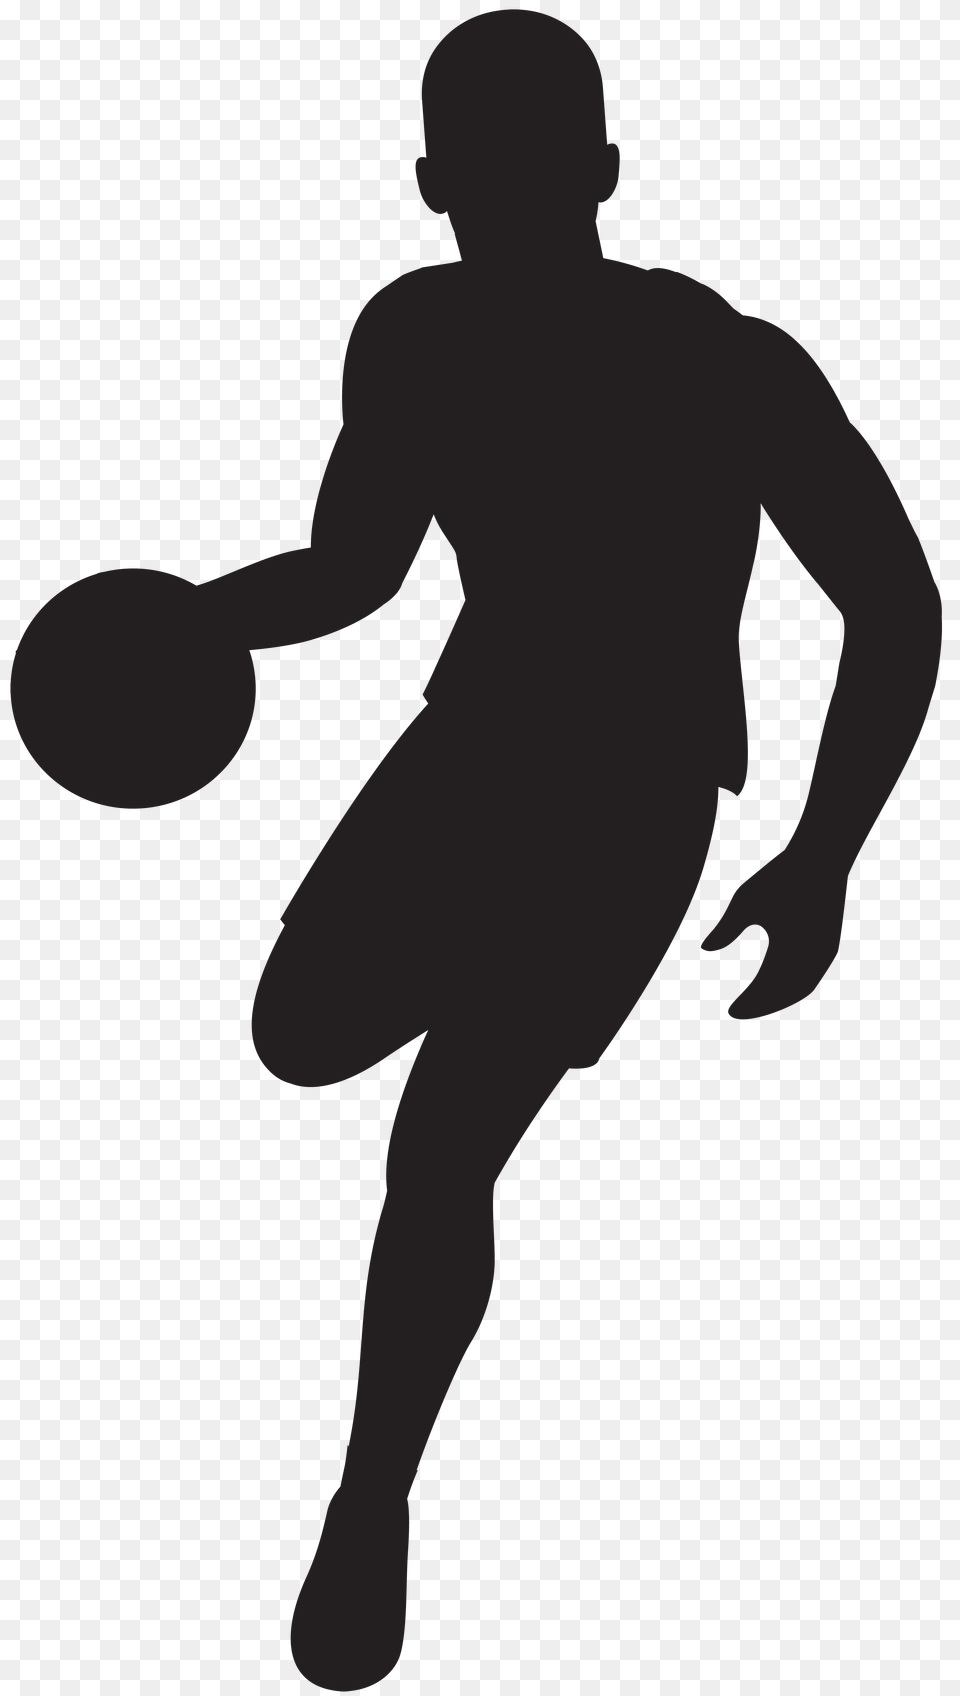 Basketball Player Silhouette Clip Art Gallery, Cross, Symbol Png Image